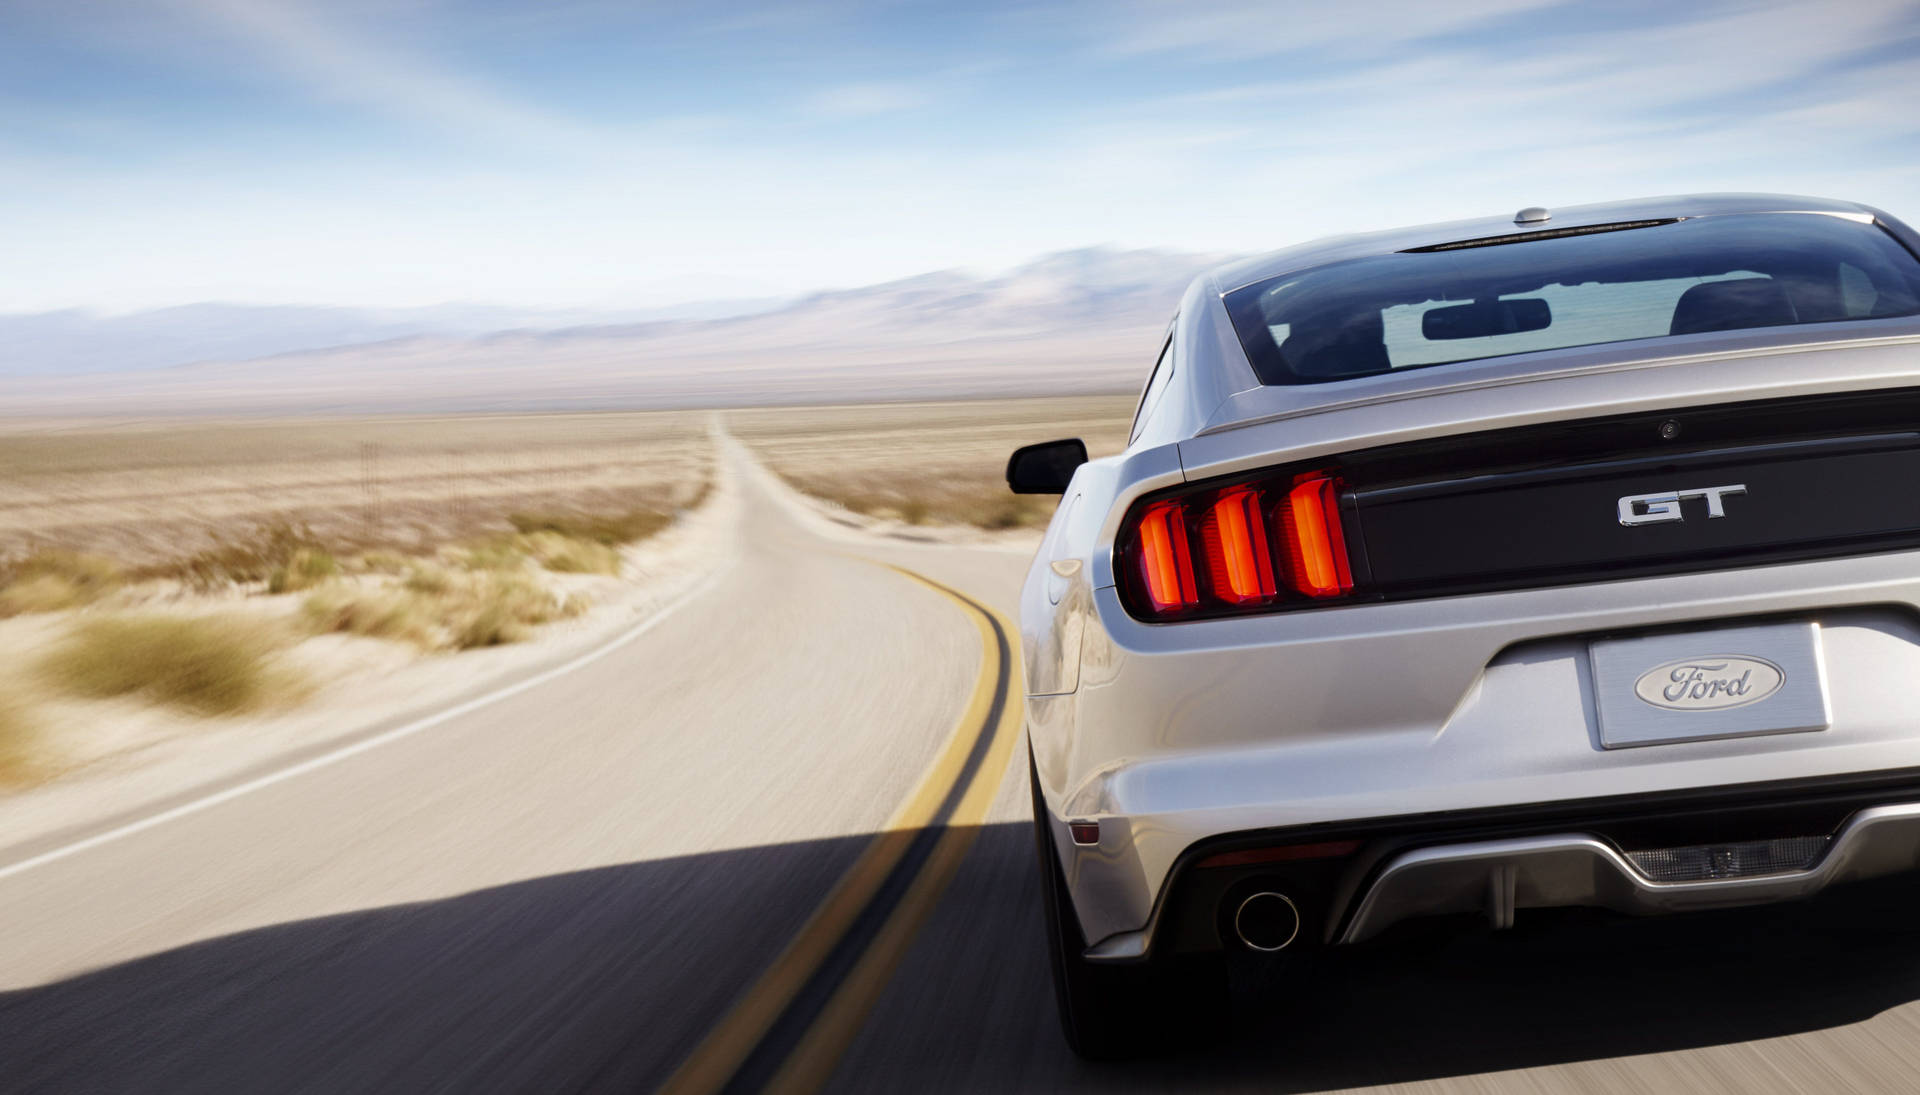 Mustang 5760X3285 Wallpaper and Background Image